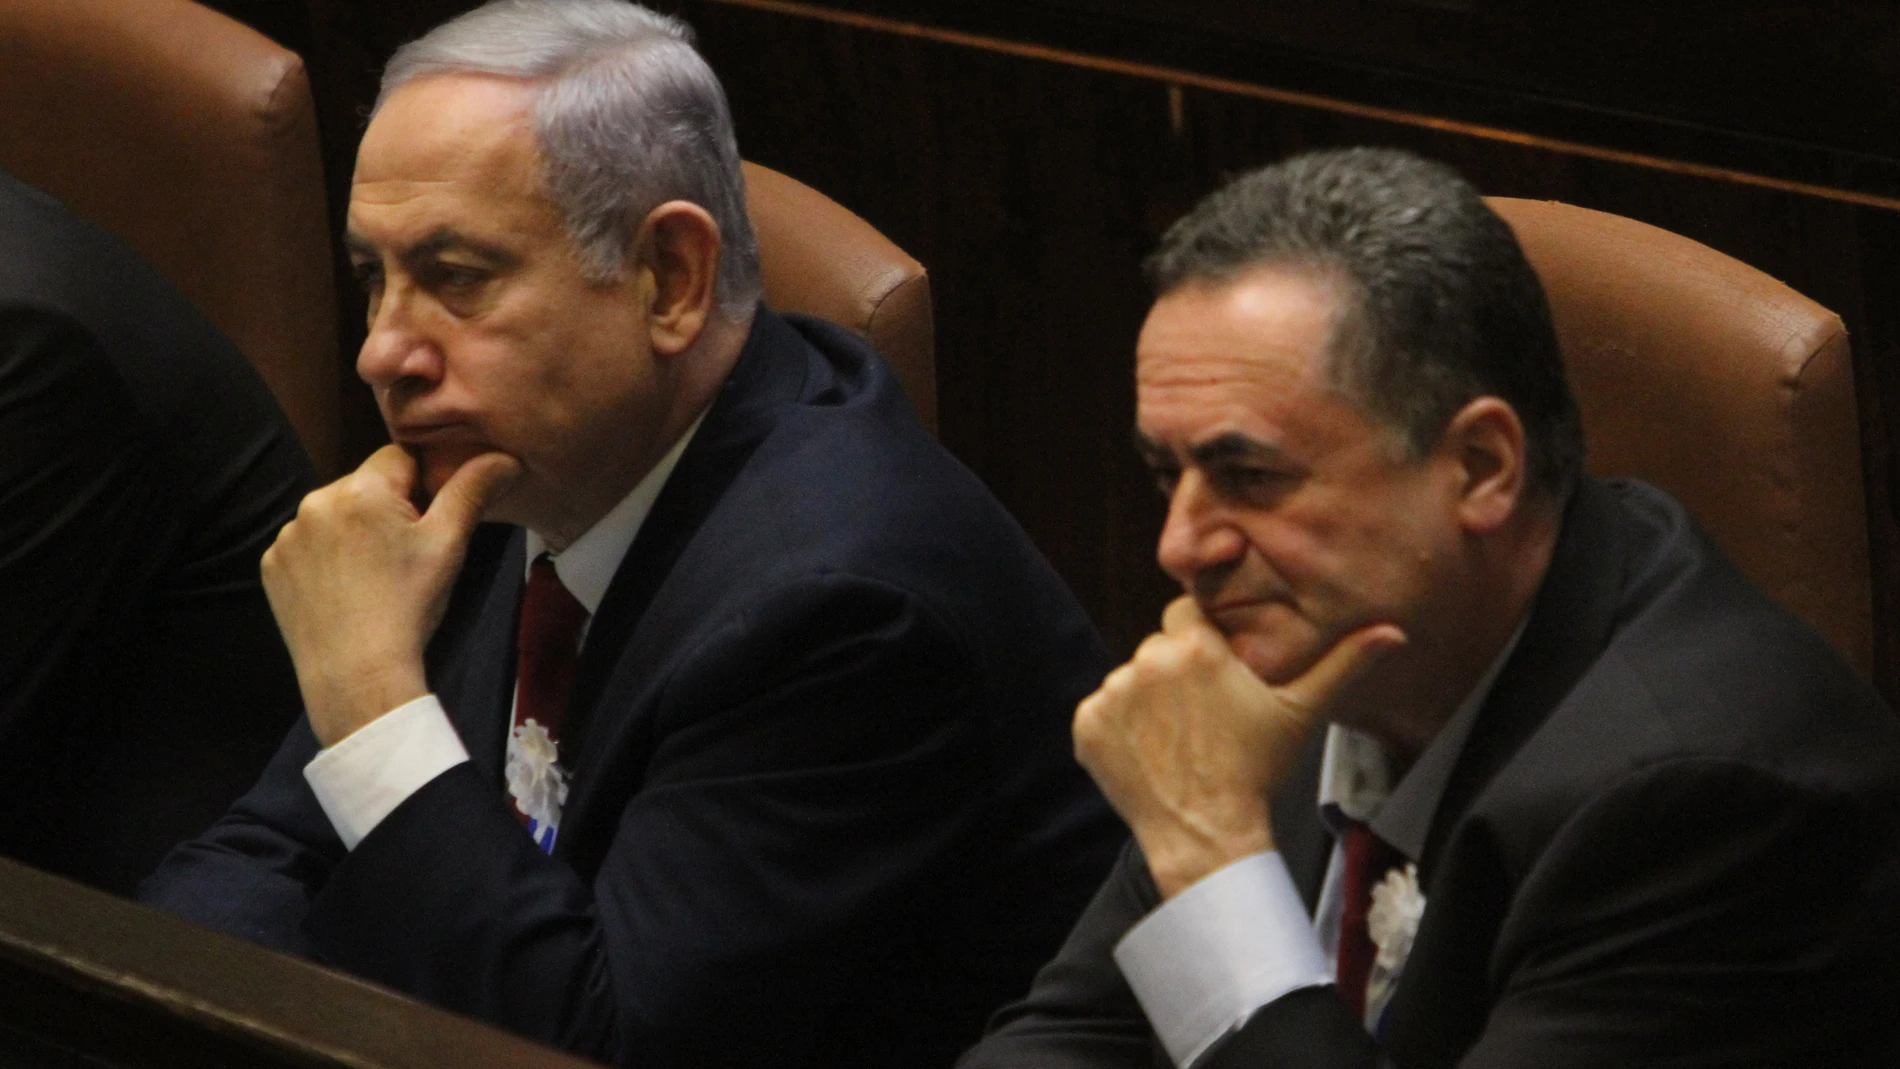 JERUSALEM, Oct. 4, 2019 Israeli Prime Minister Benjamin Netanyahu (L) and Foreign Minister Yisrael Katz attend a swearing-in ceremony of the Knesset in Jerusalem, Oct. 3, 2019. Israeli lawmakers were sworn into the new parliament, or Knesset, on Thursday afternoon, without a new government formed, after tight results in the country's do-over elections caused a political deadlock. . The ceremony marked the inauguration of Israel's 22nd Knesset. (Photo by Gil Cohen Magen/Xinhua) (Foto de ...